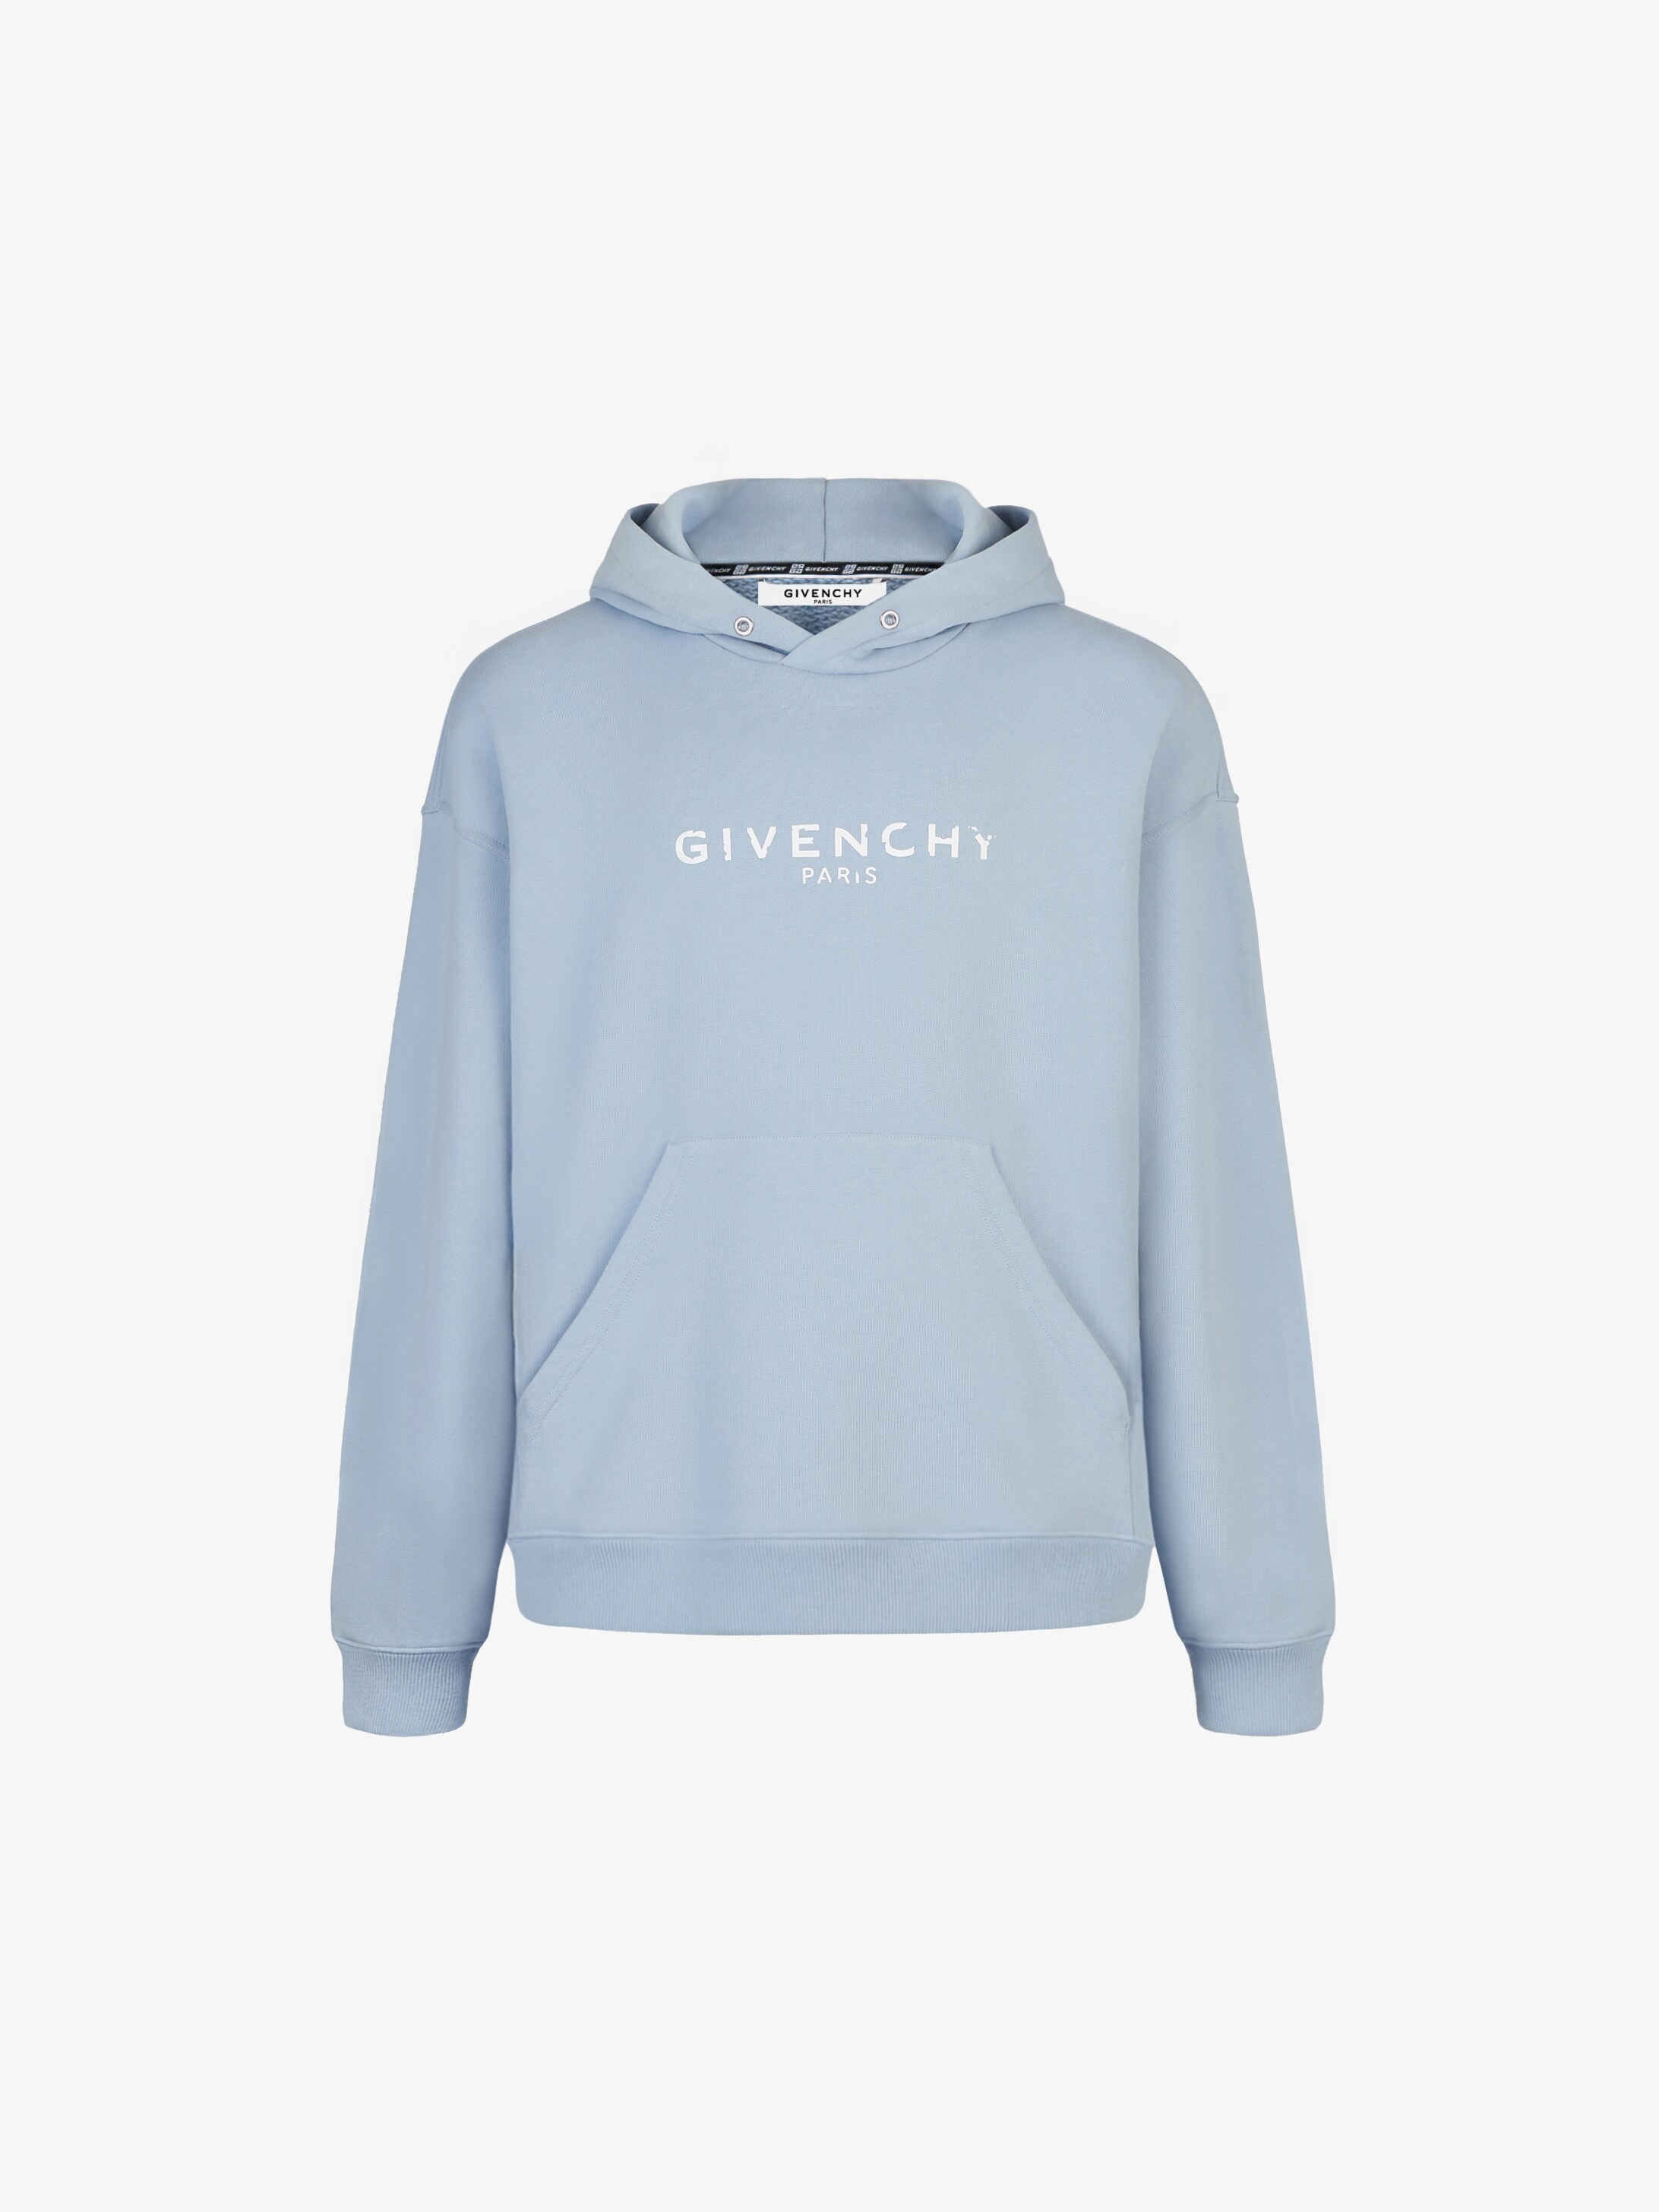 blurred givenchy paris hoodie